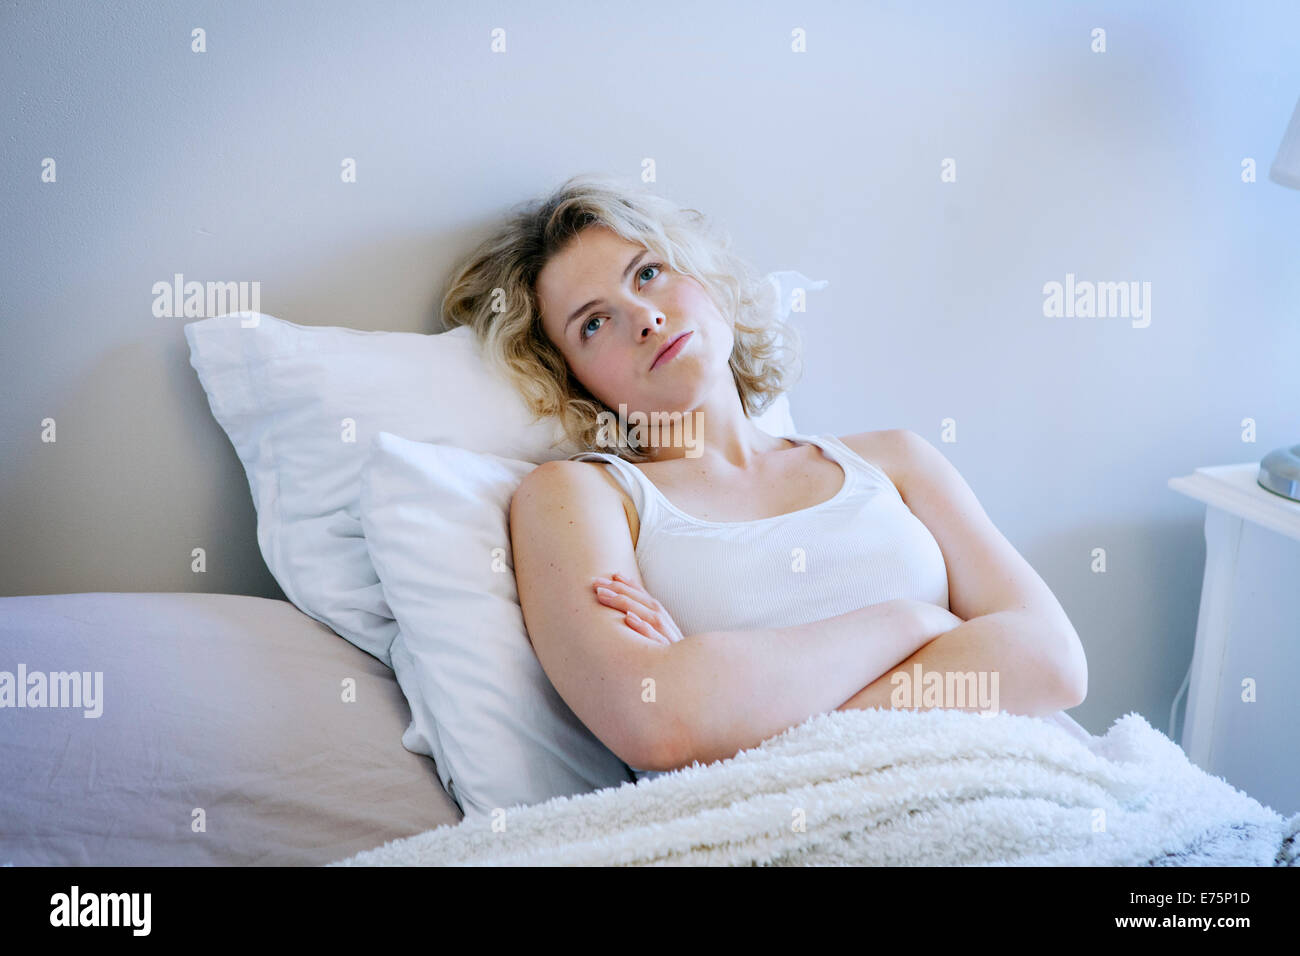 Woman with insomnia Stock Photo